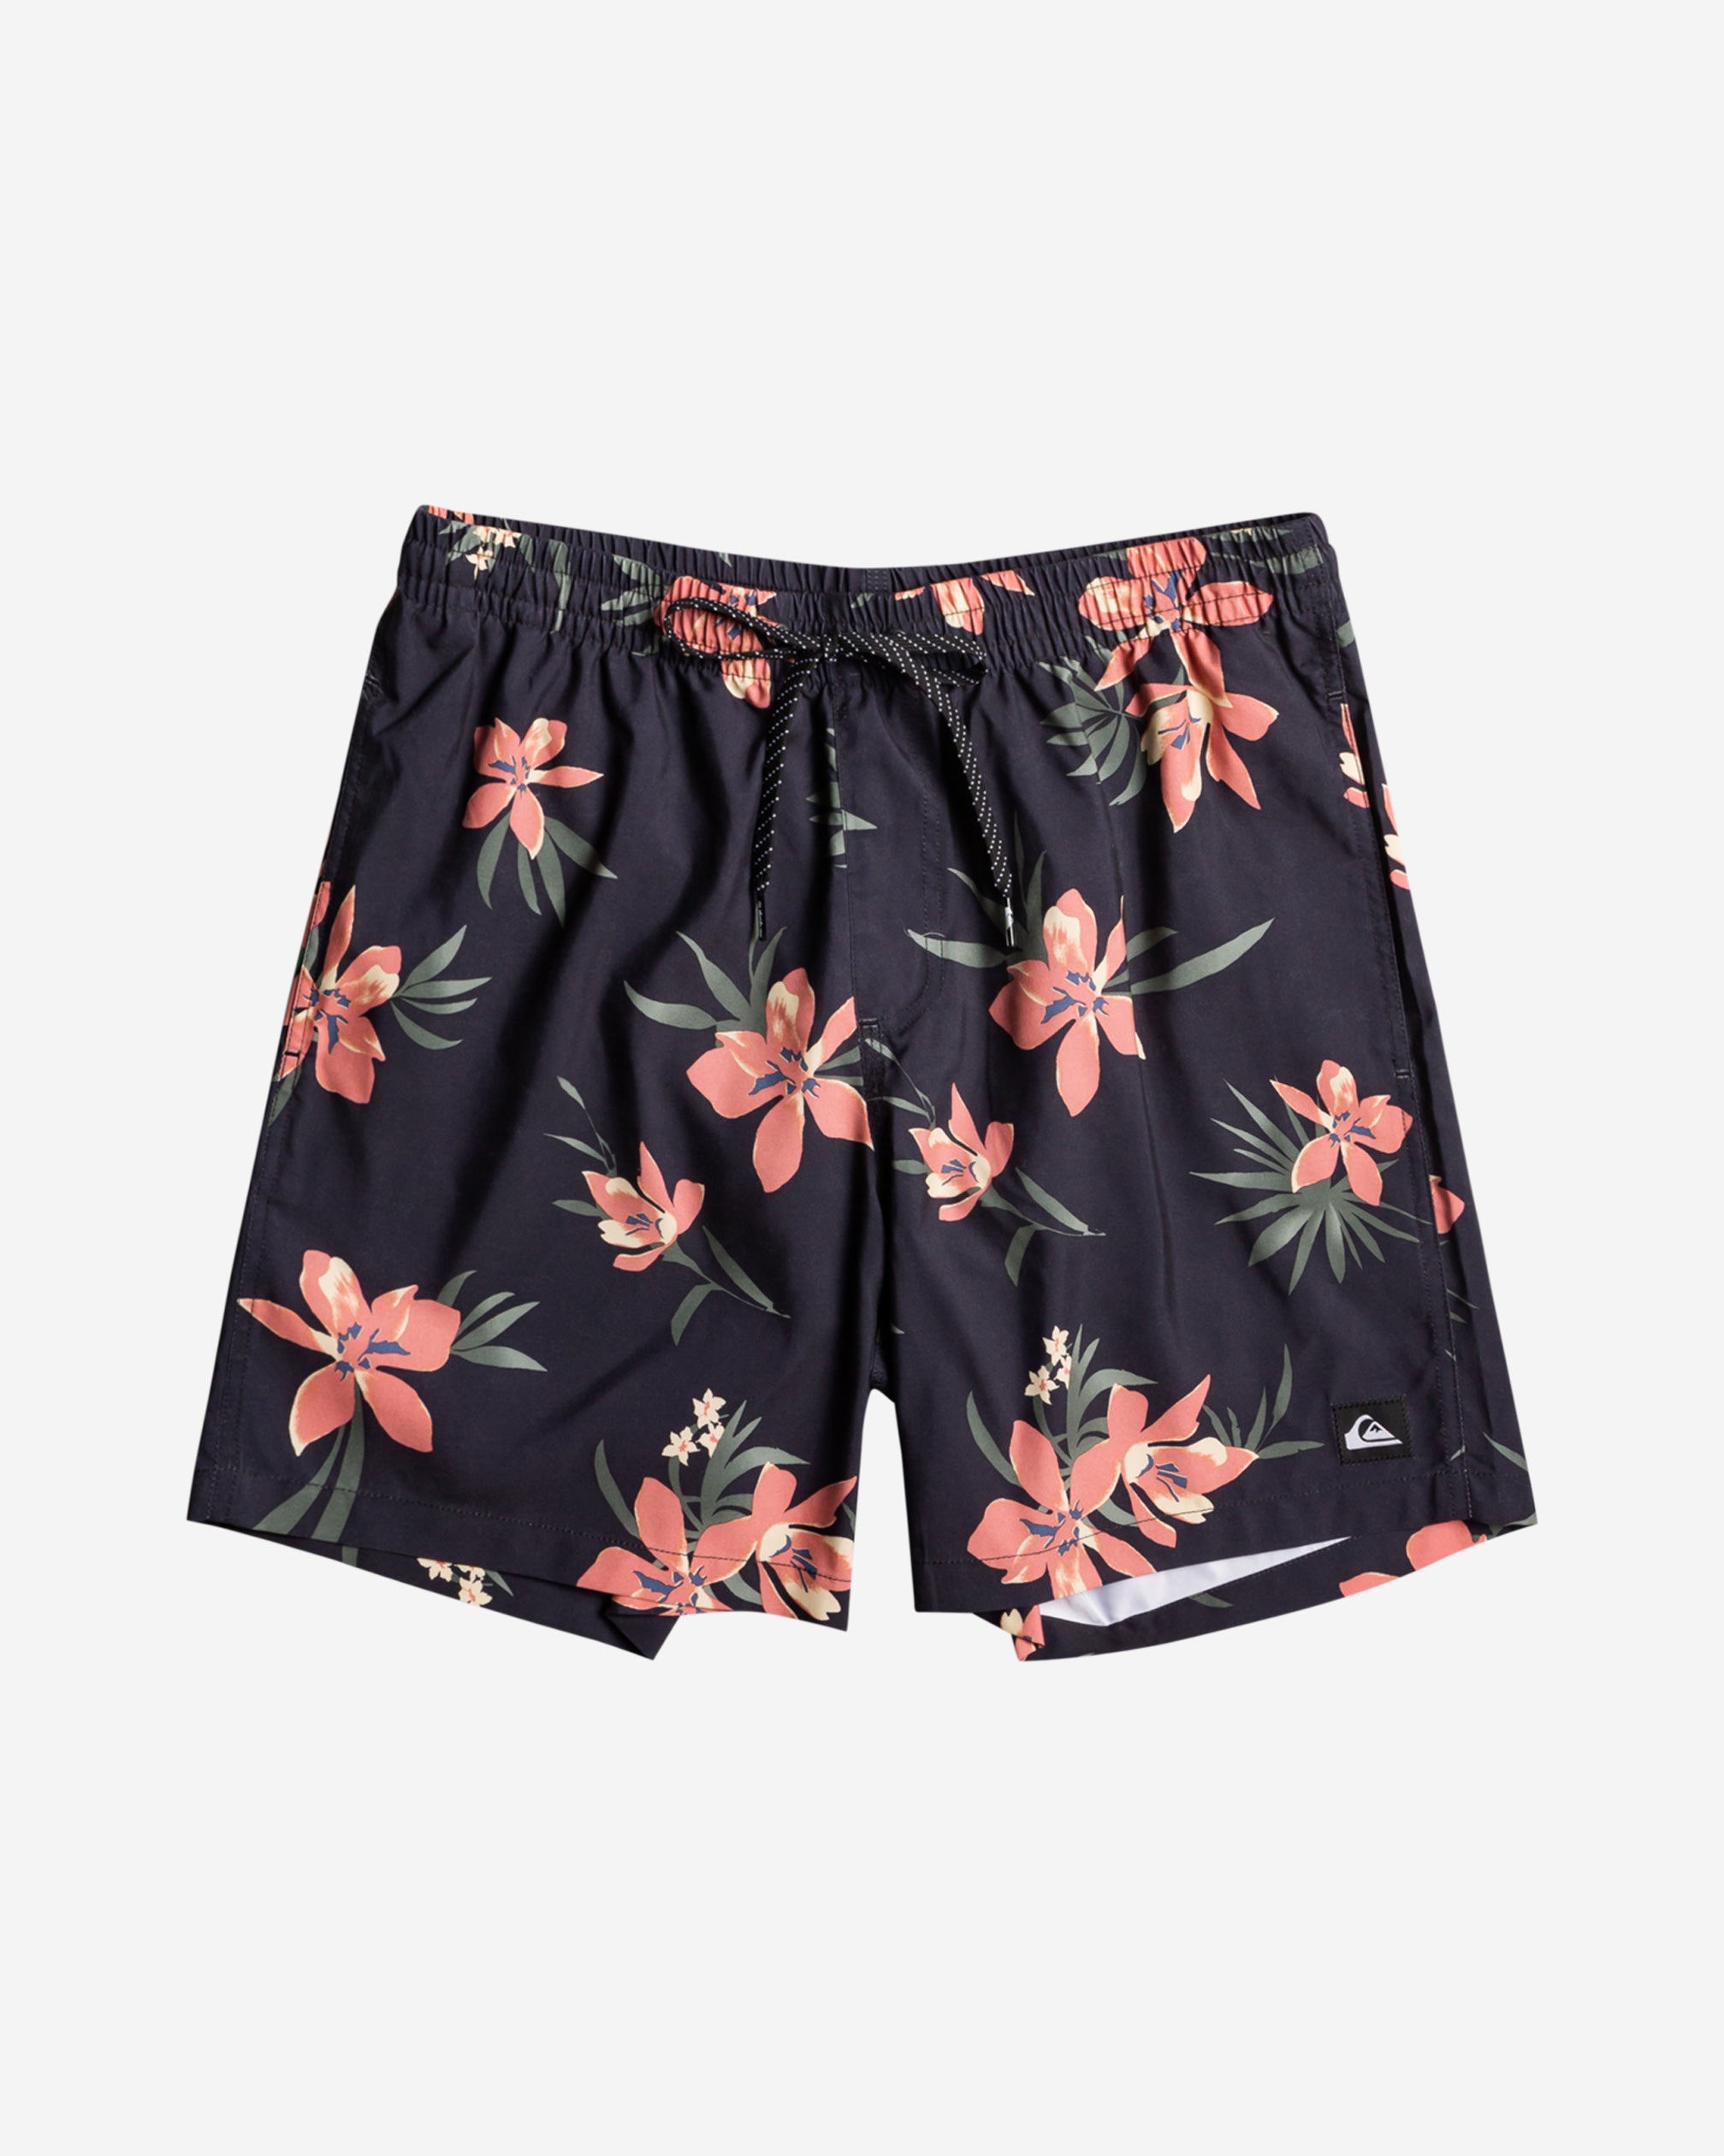 The Everyday Mix Swim Short is your passport to paradise. The eco-conscious fabric is backed with a tropical print that's primed for ocean, pool, and lake adventures.